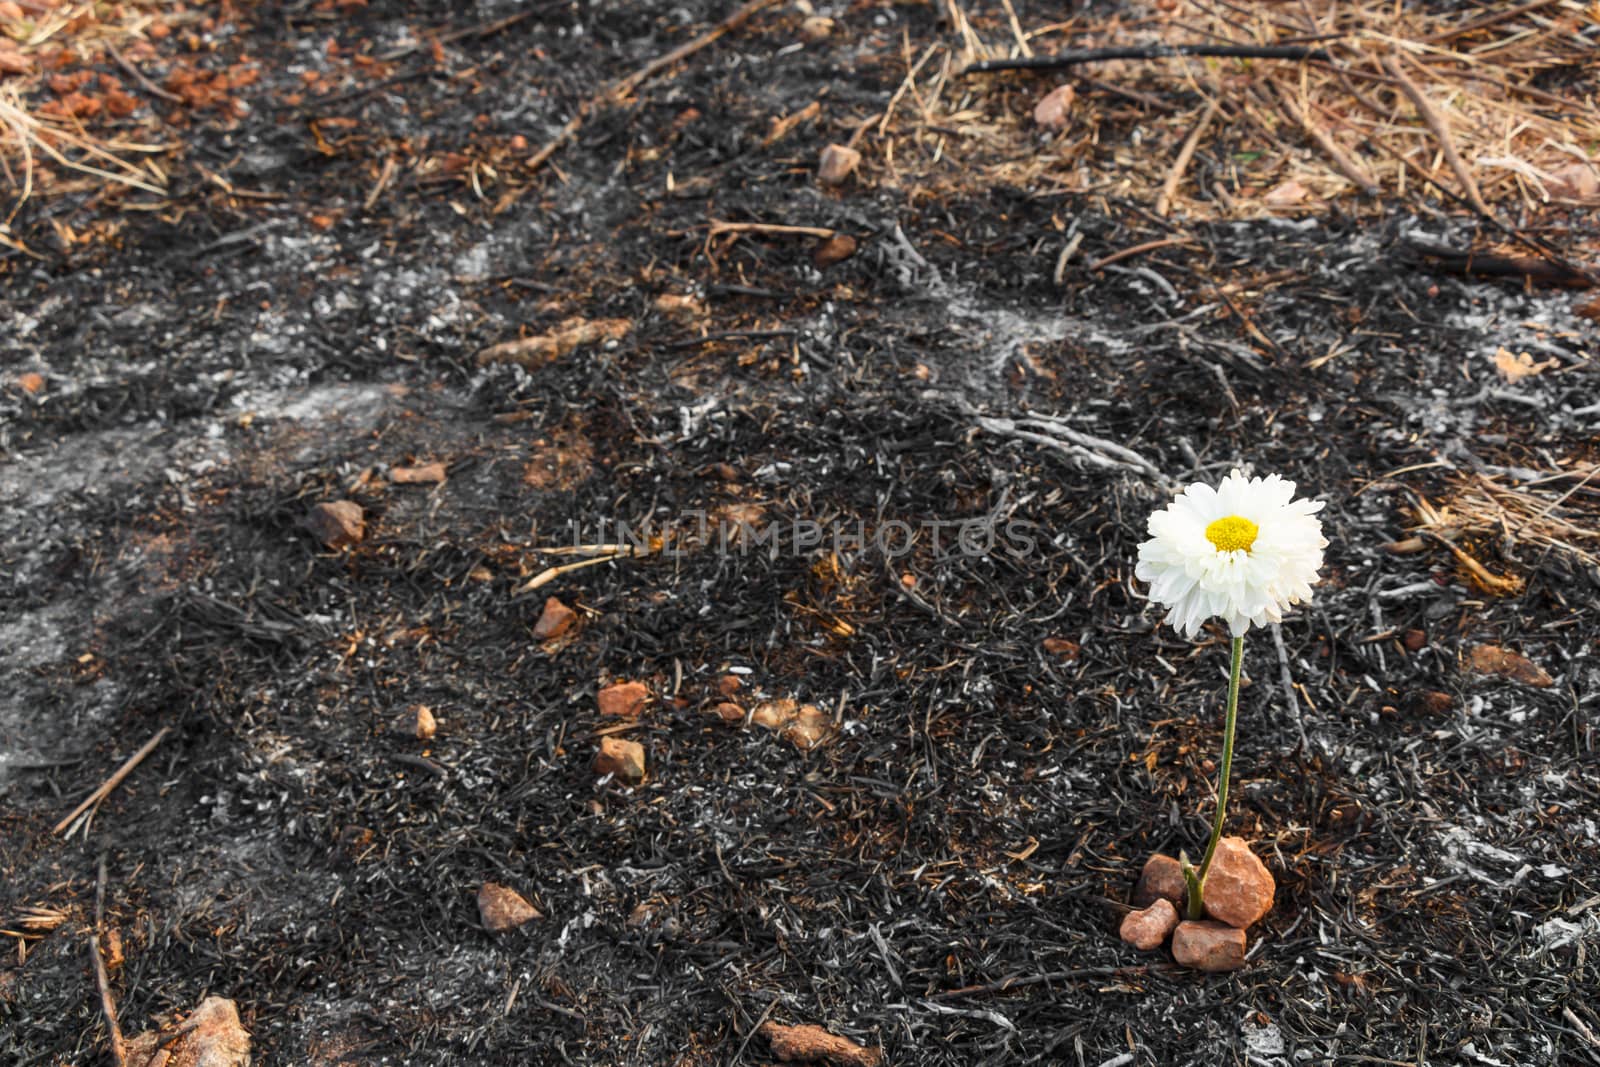 white flower can survive on ash of burnt grass due to wildfire